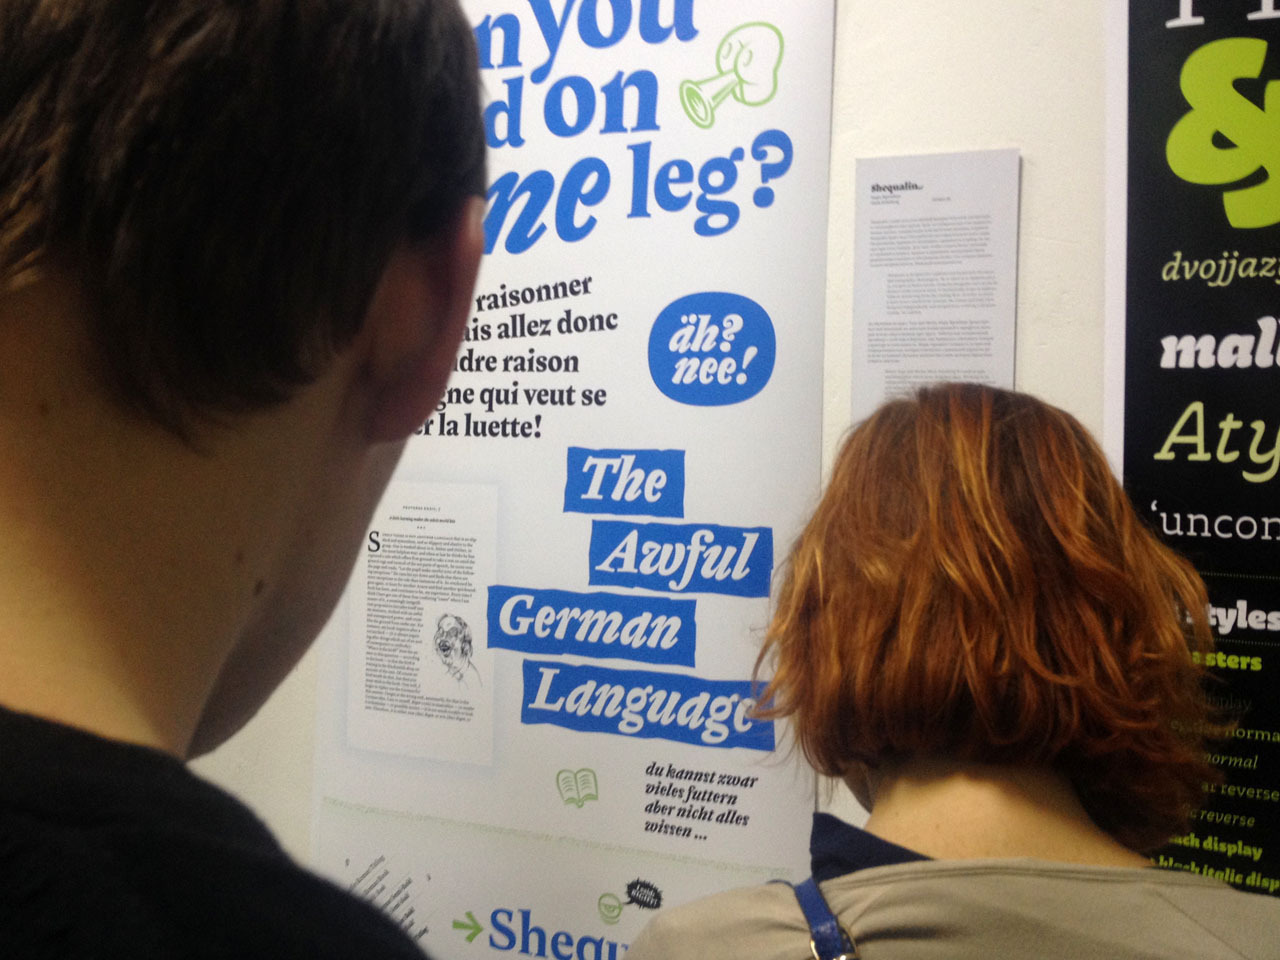 The wonderful German language seems to be quite adequate for type graduation posters.